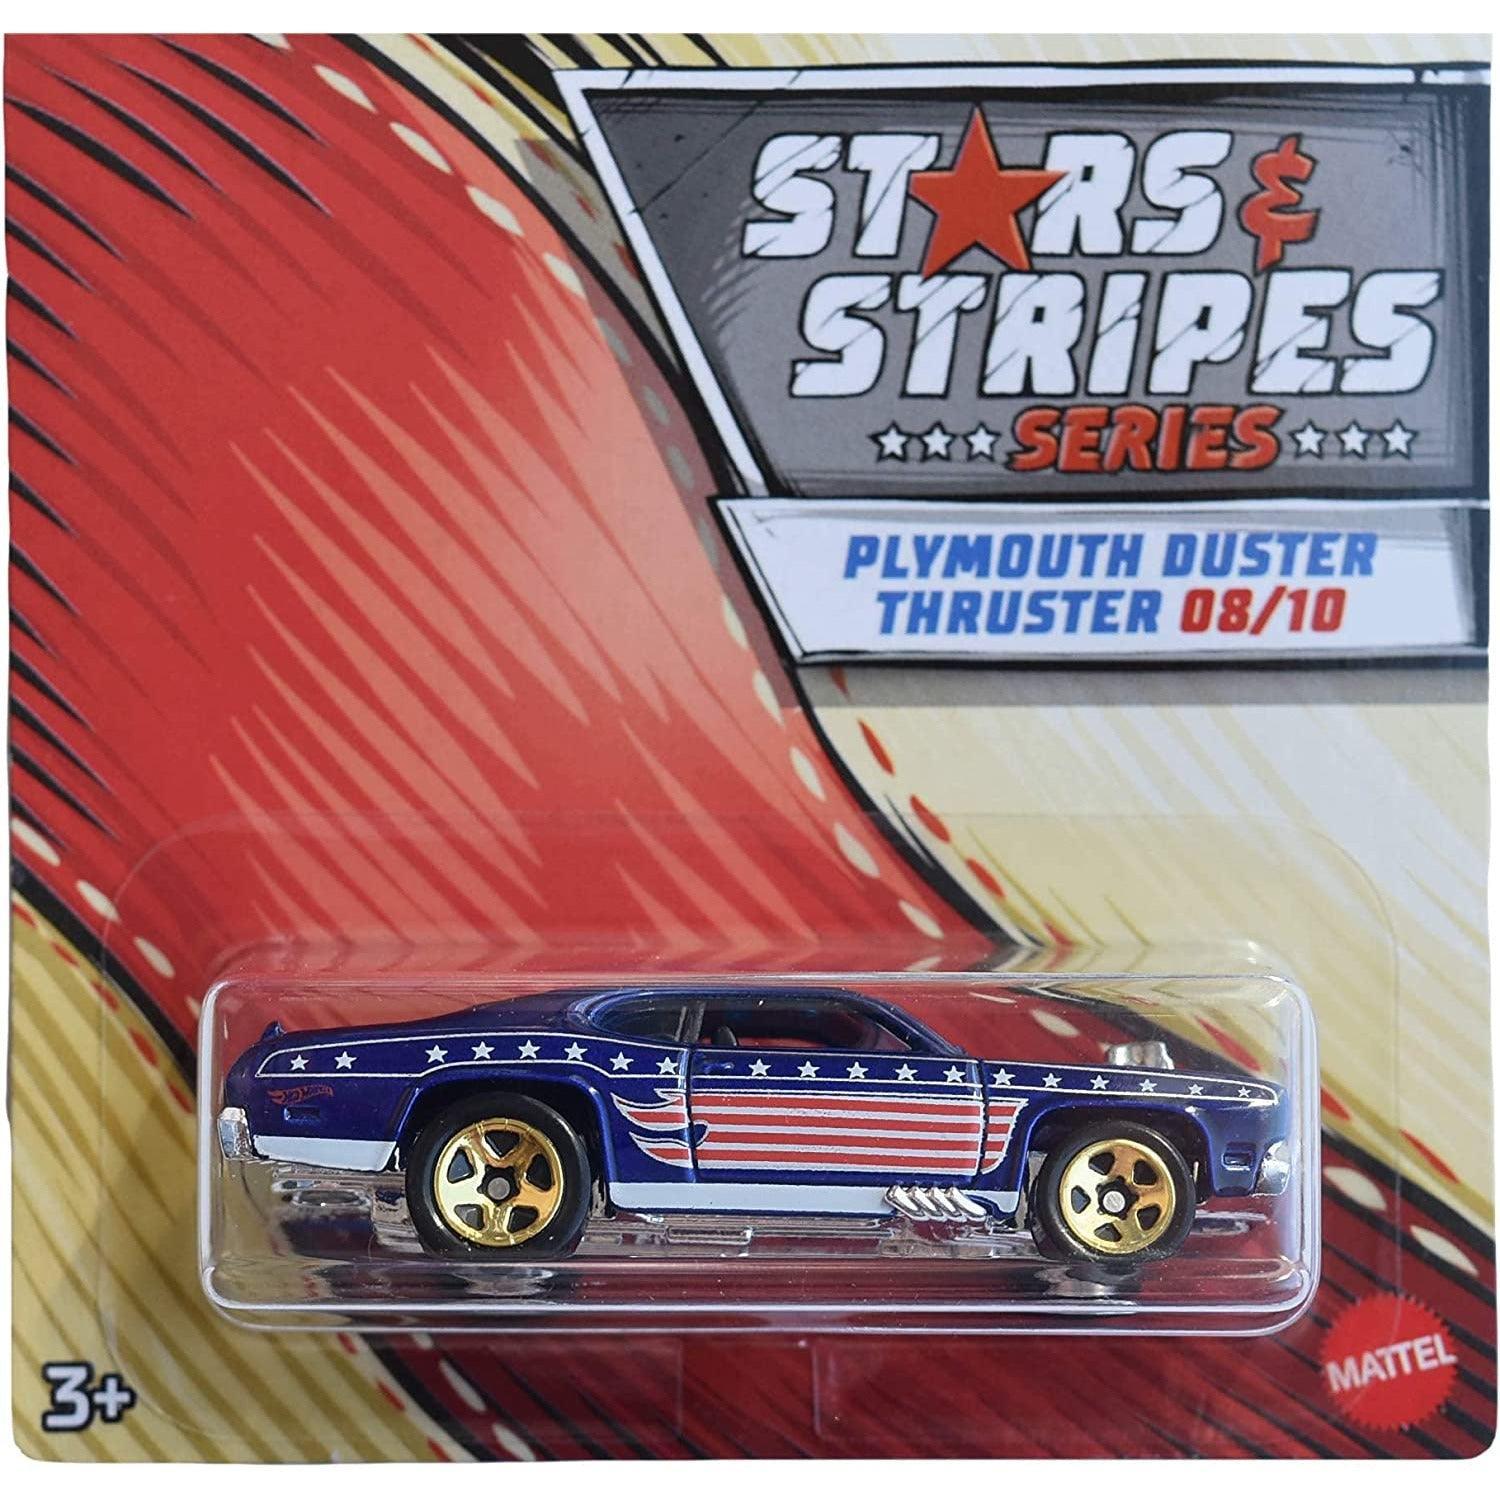 Hot Wheels American Stars & Stripes Series Plymouth Duster Thruster [Blue] 8/10 - BumbleToys - 2-4 Years, 5-7 Years, Boys, Collectible Vehicles, Pre-Order